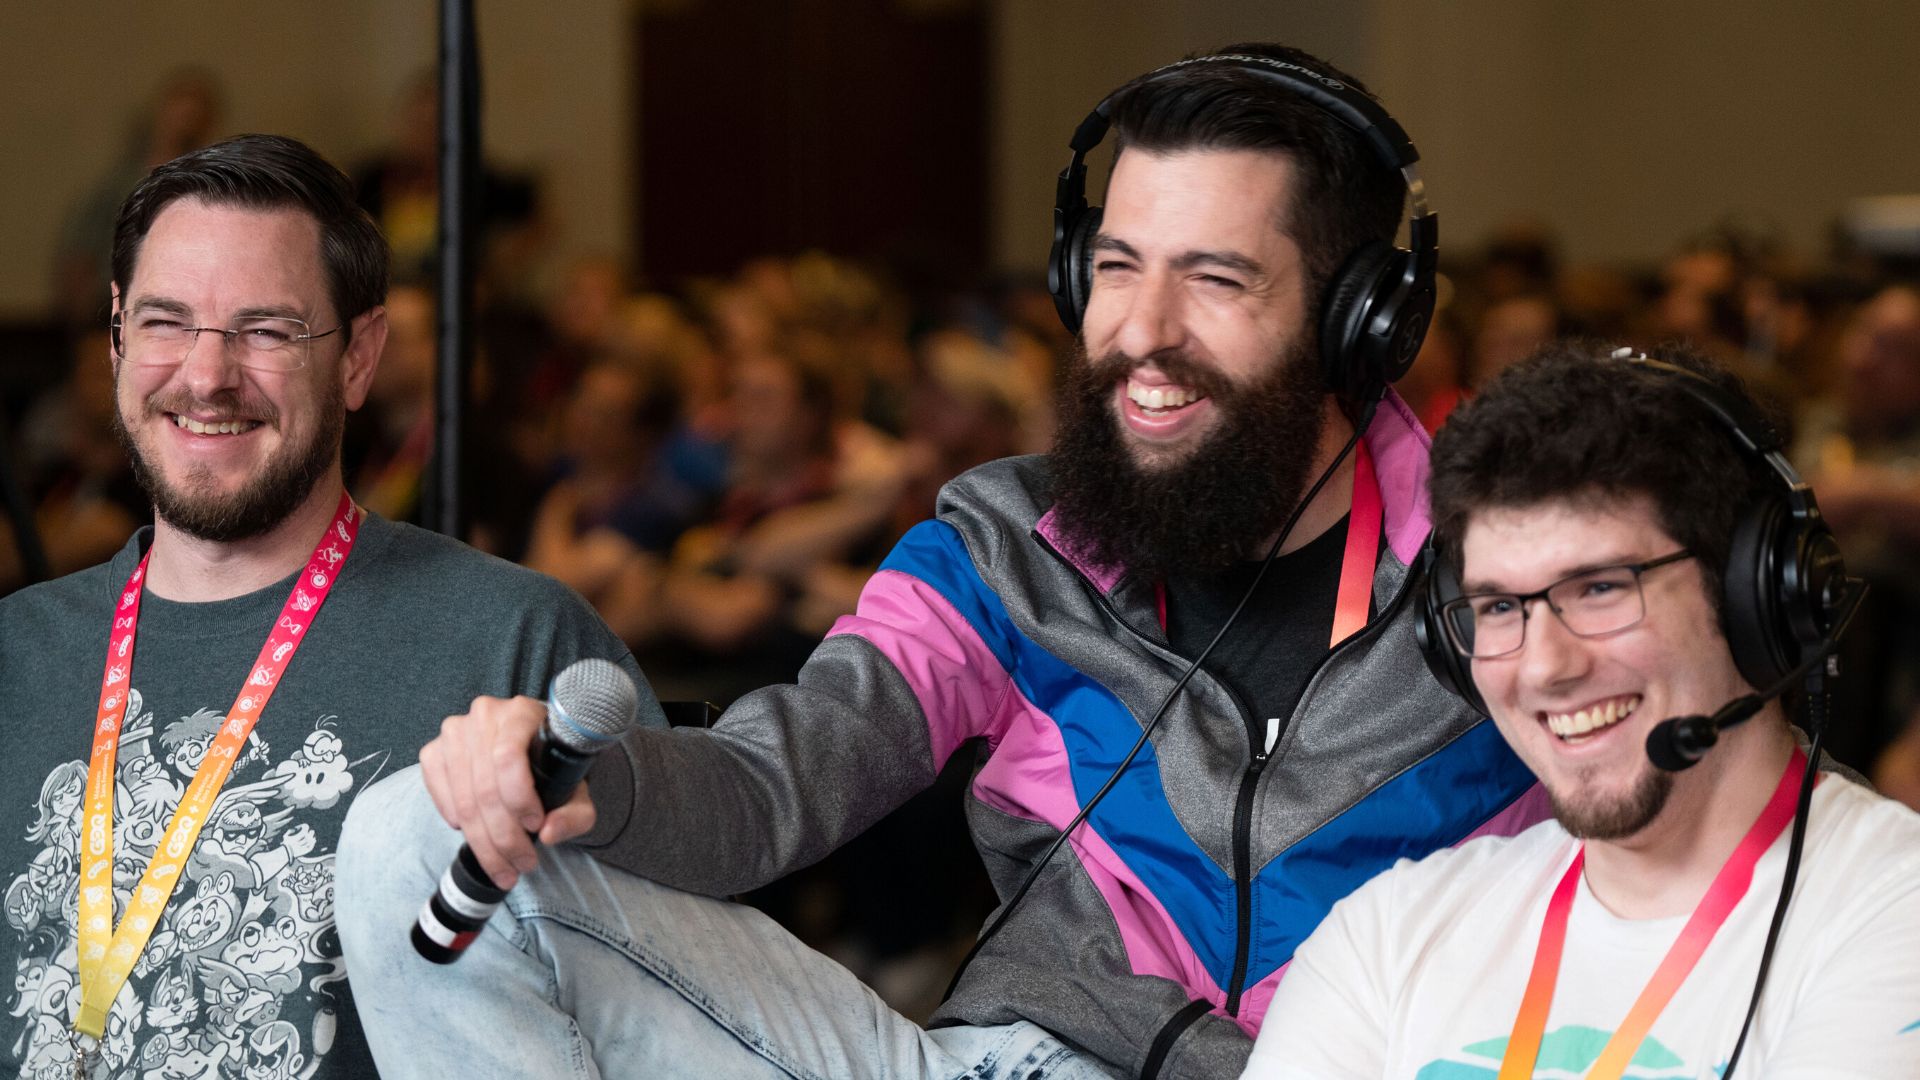 AGDQ 2023 will be online due to Florida's LGBTQ+ and COVID-19 policies